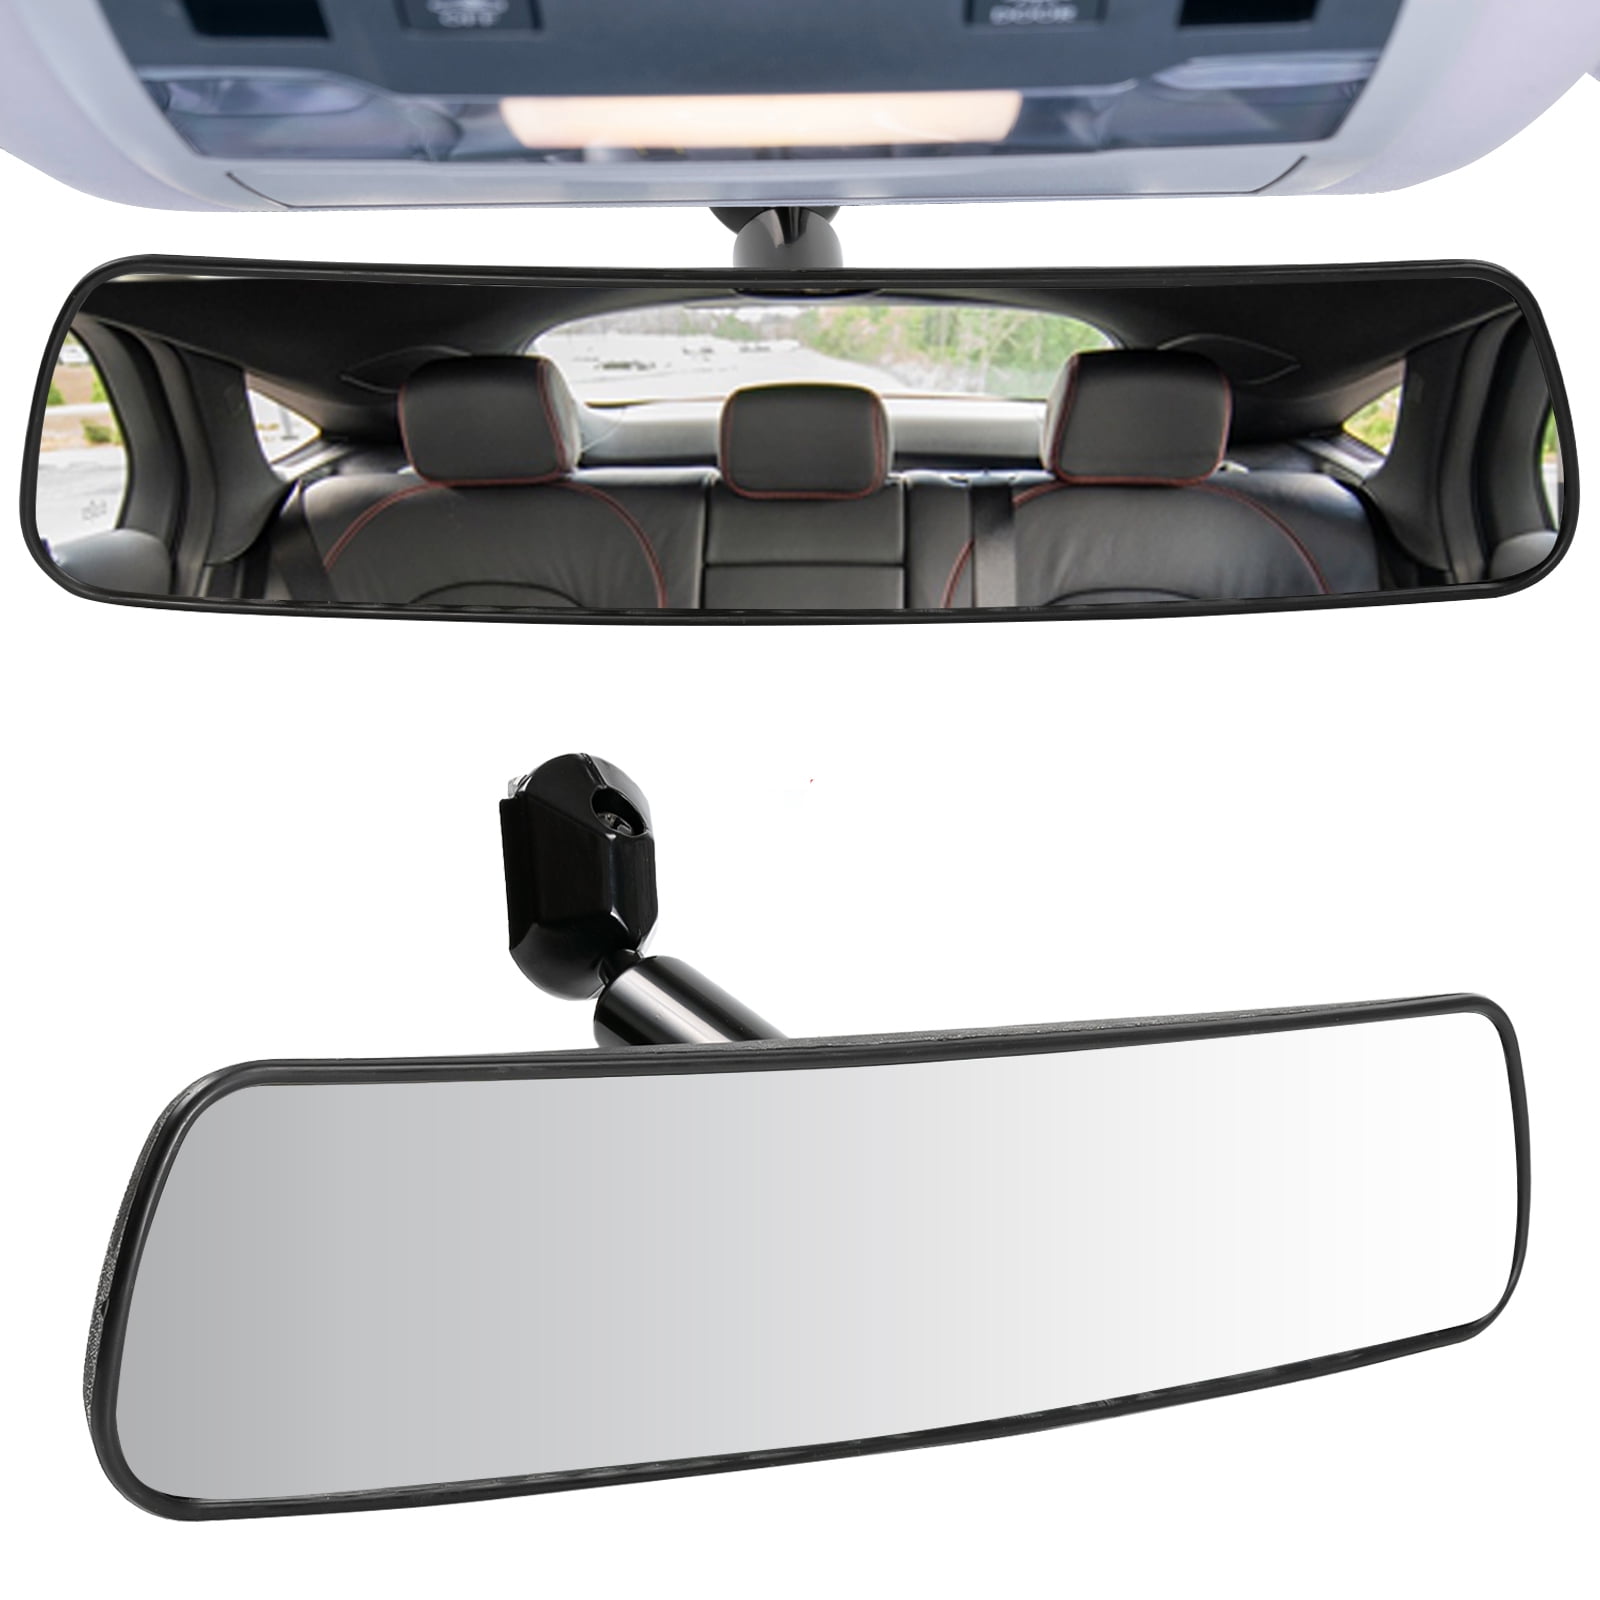 Rear View Mirror Hanging Tags